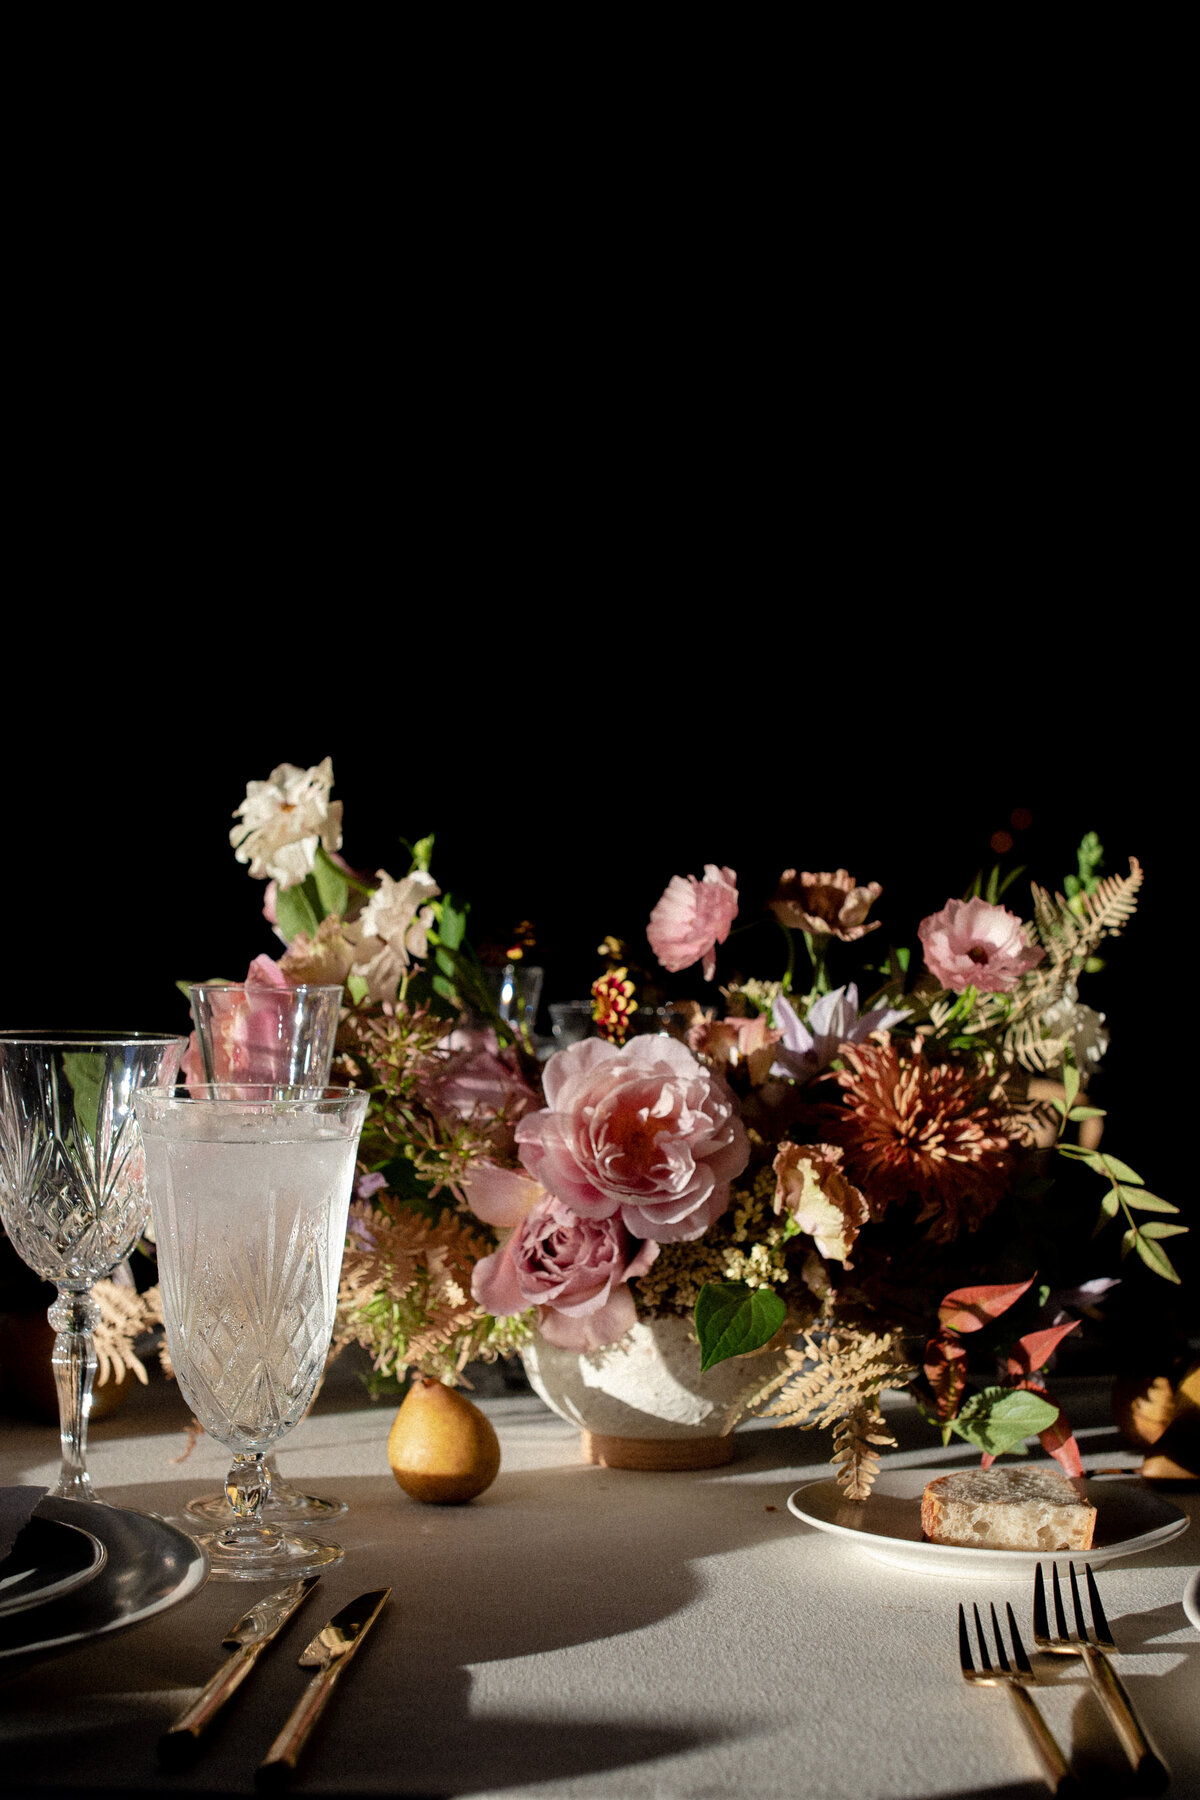 Dramatic wedding tablescape with waterford crystal glasses, brown pears, and a creative pink, brown, and green floral centerpiece.